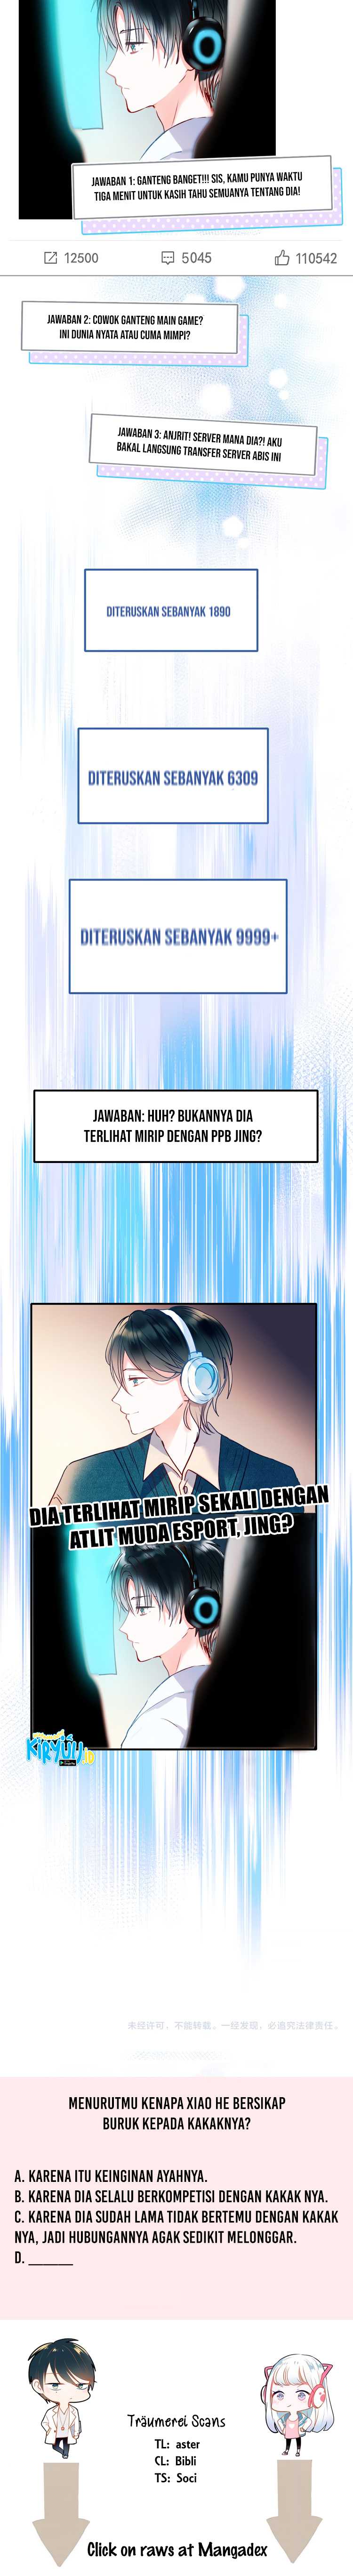 To be a Winner Chapter 49